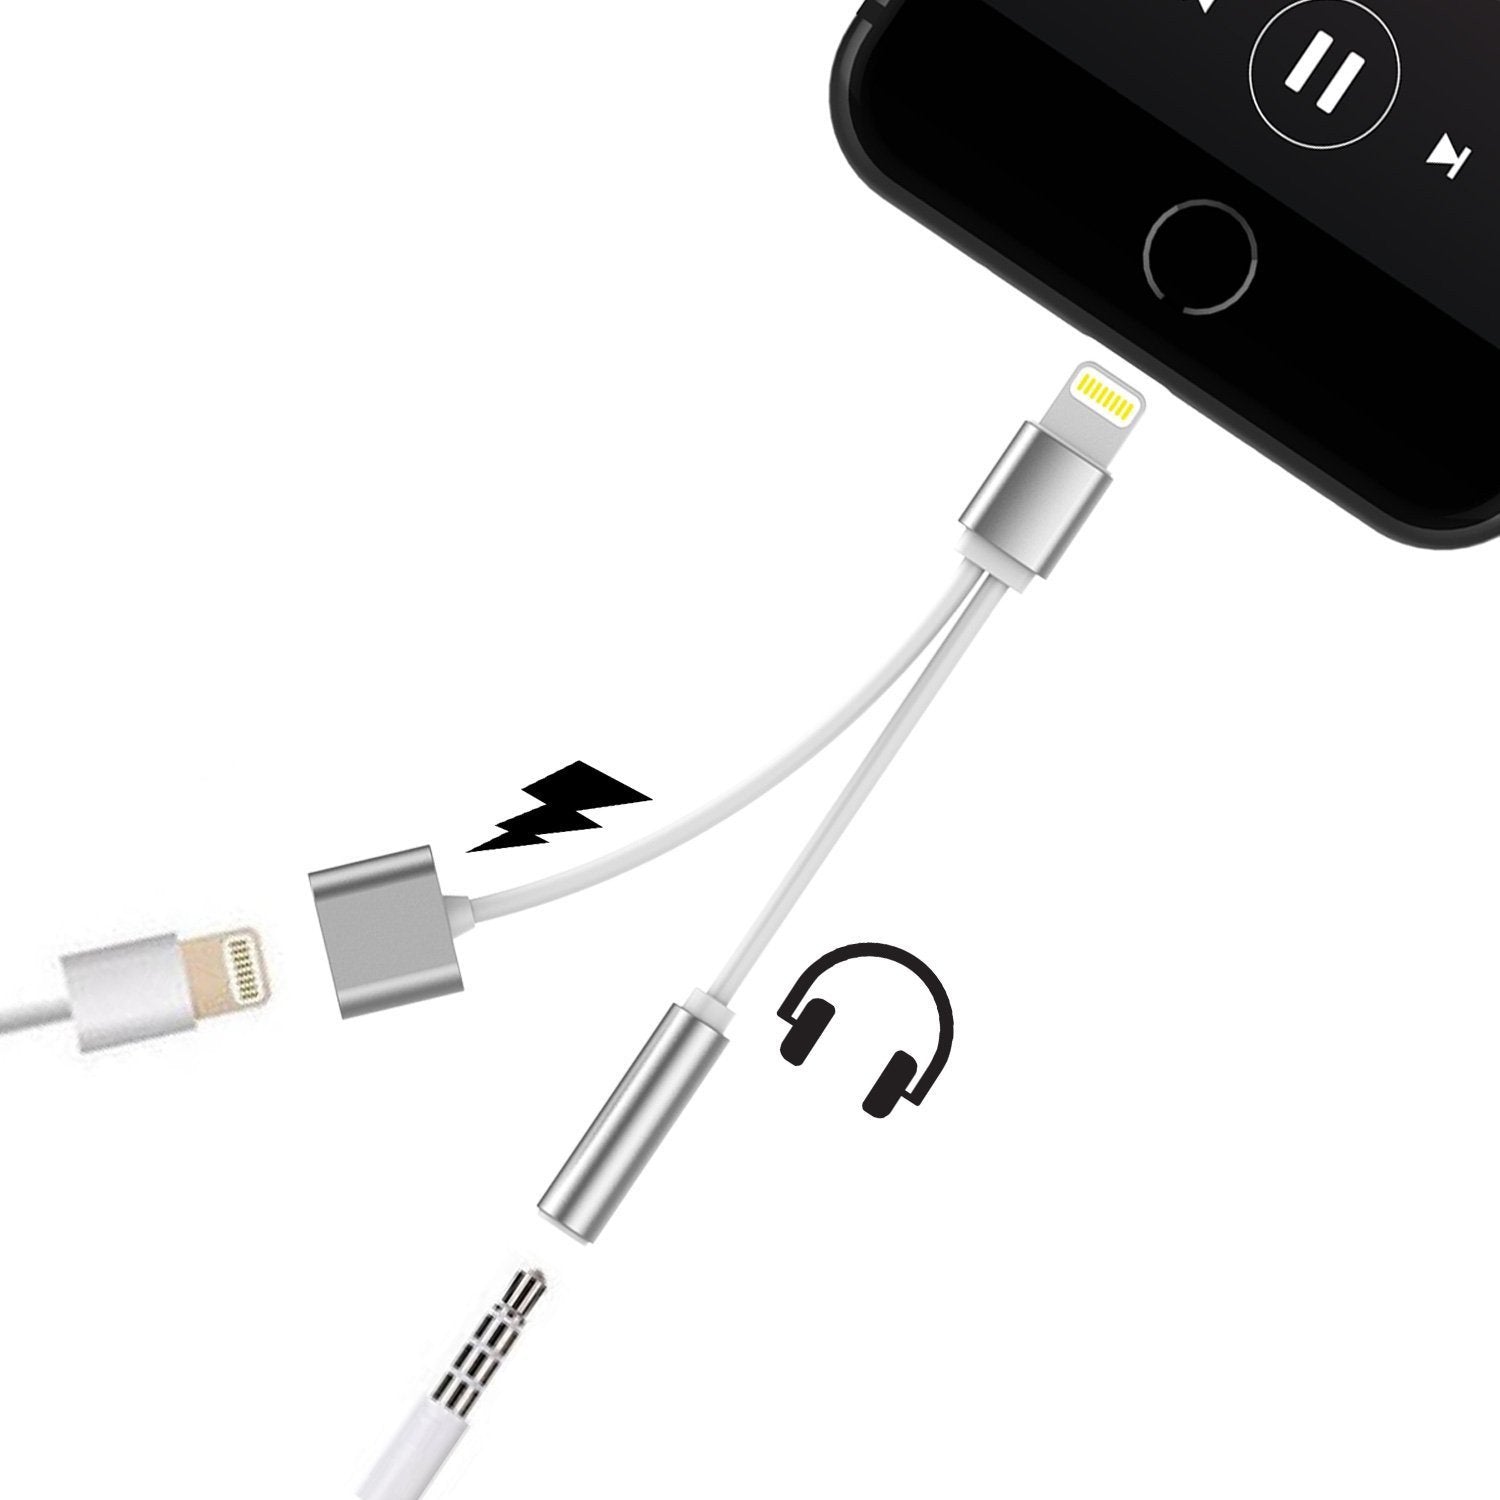 PUNKZAP Lightning Adapter Cable 2 in 1 Splitter Charger with 3.5mm Earphone AUX Jack|Charge & Listen to your Apple iPhone X/8/7/6s/6/5s/5 8+/7+/6+/6S+ Plus [SILVER]